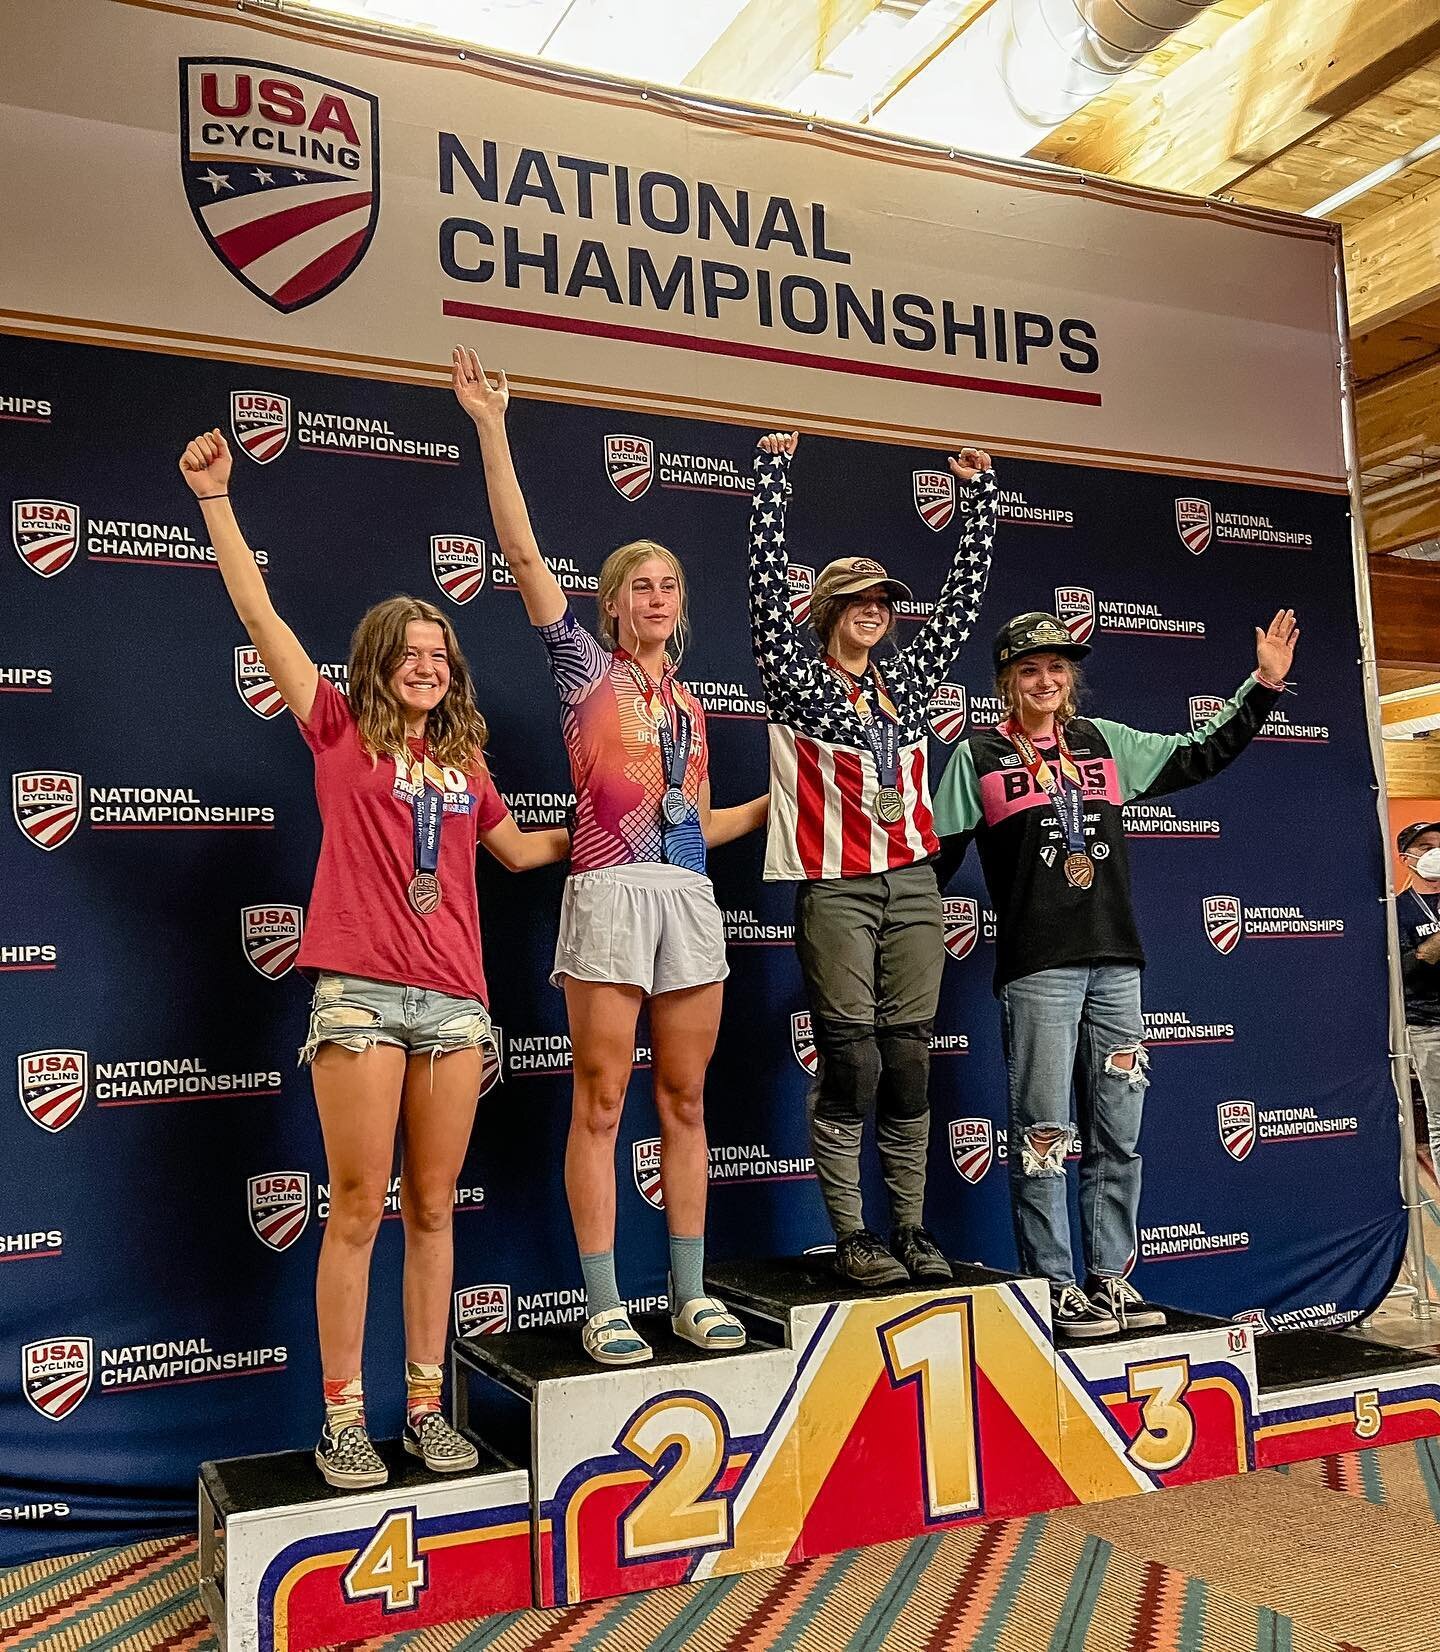 🤩 Congrats to @landrie_mclain for her 🥈 place finish at Nationals in the W&rsquo;s 15-16 Enduro event! So proud of all the work she&rsquo;s done this year to make the result a reality! 

@oztrailsnwa
@trailblazers
@mertinseye
Schmieding Foundation
